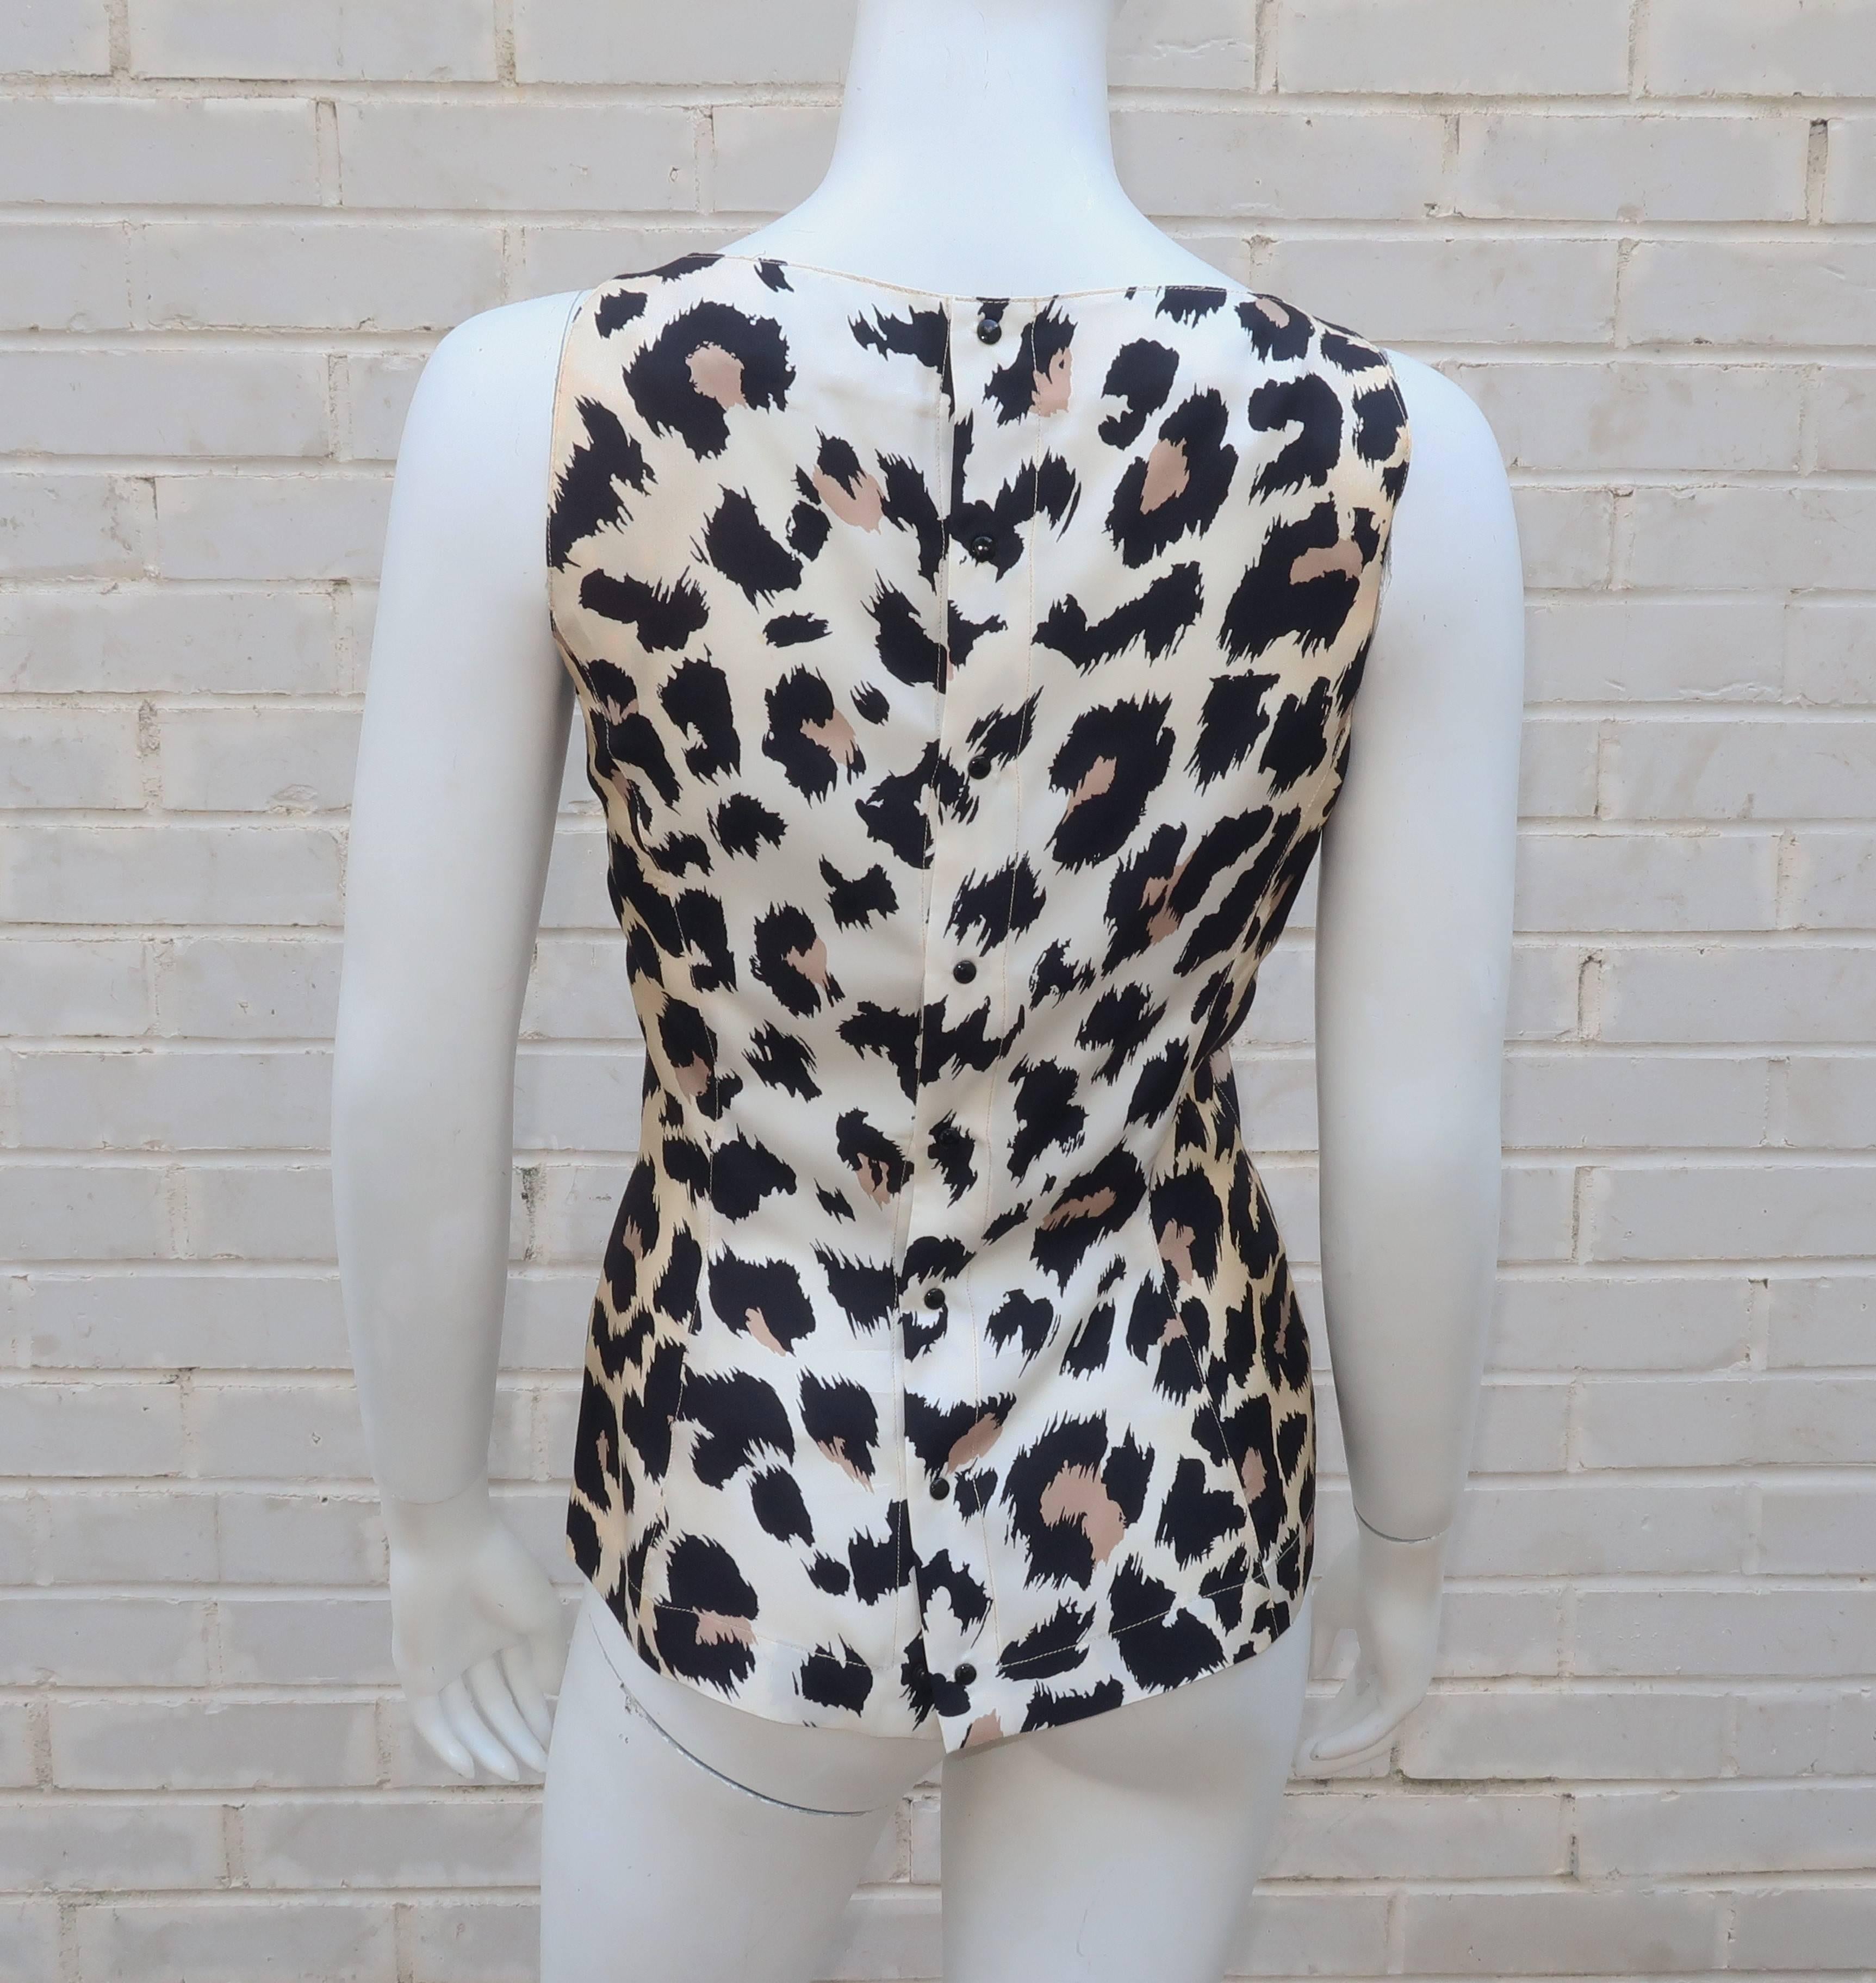 Thierry Mugler Silk Animal Leopard Print Top, C.1990 For Sale 2